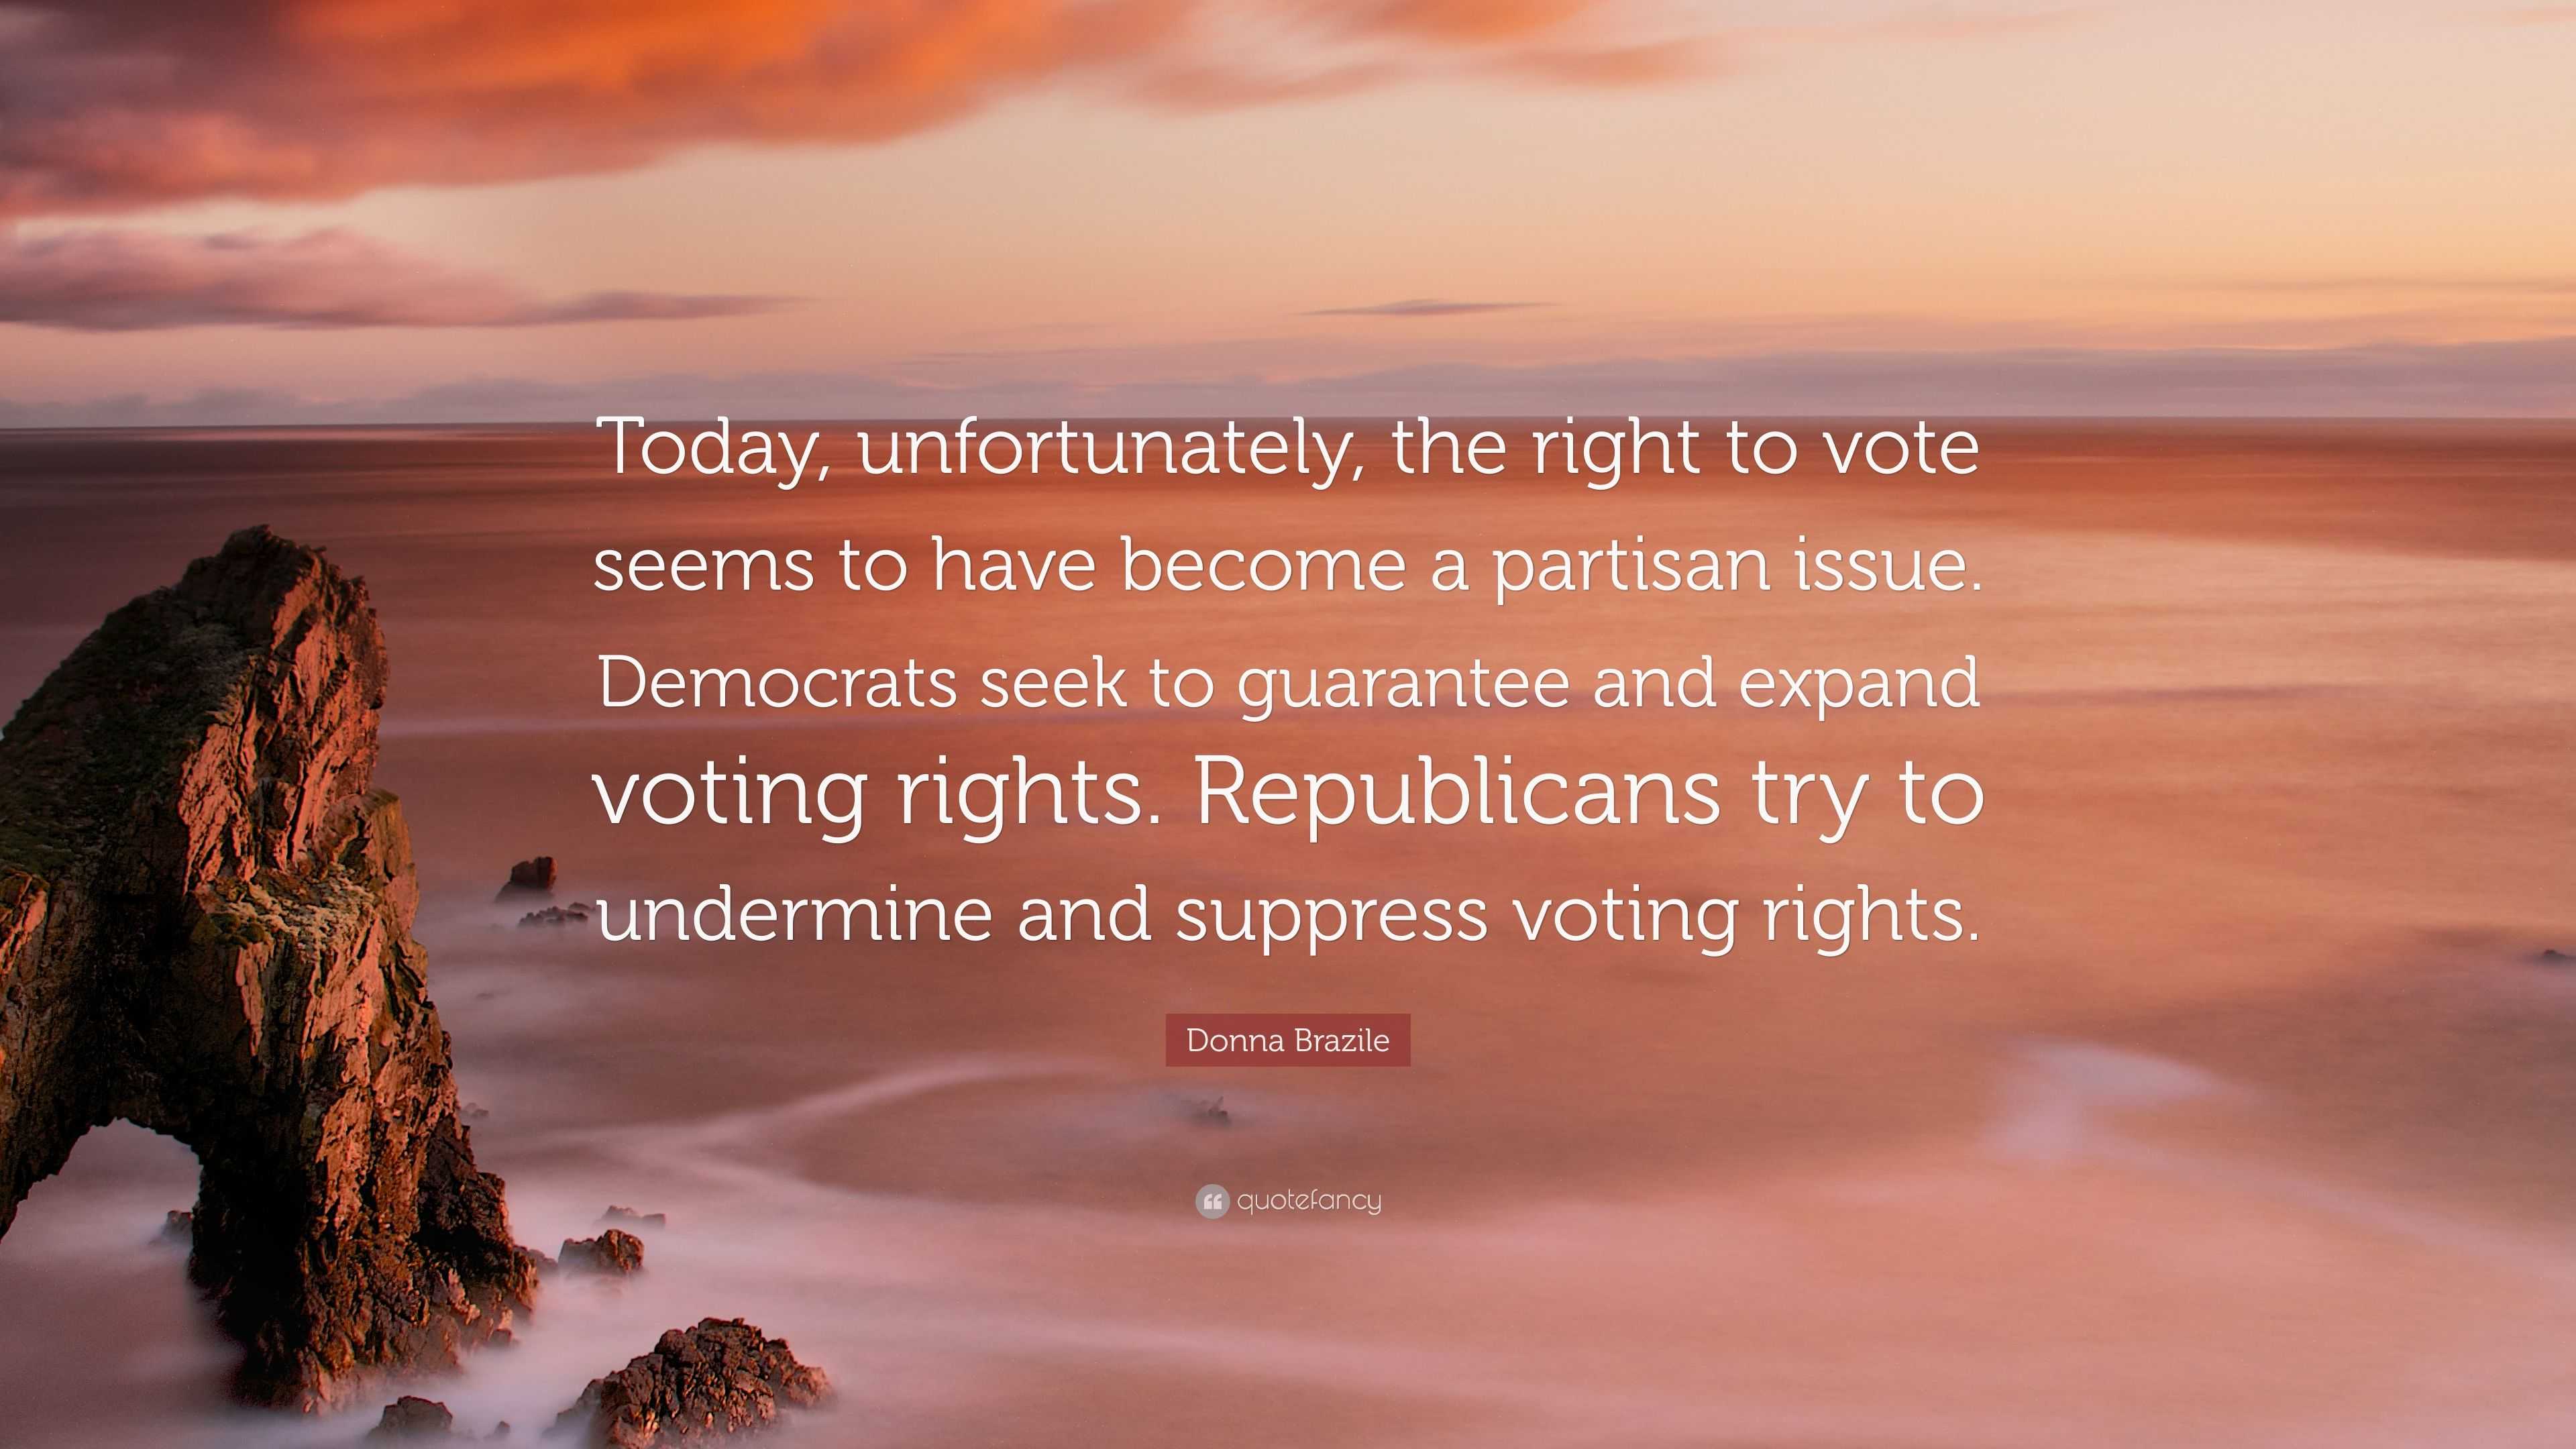 Donna Brazile Quote: “Today, unfortunately, the right to vote seems to